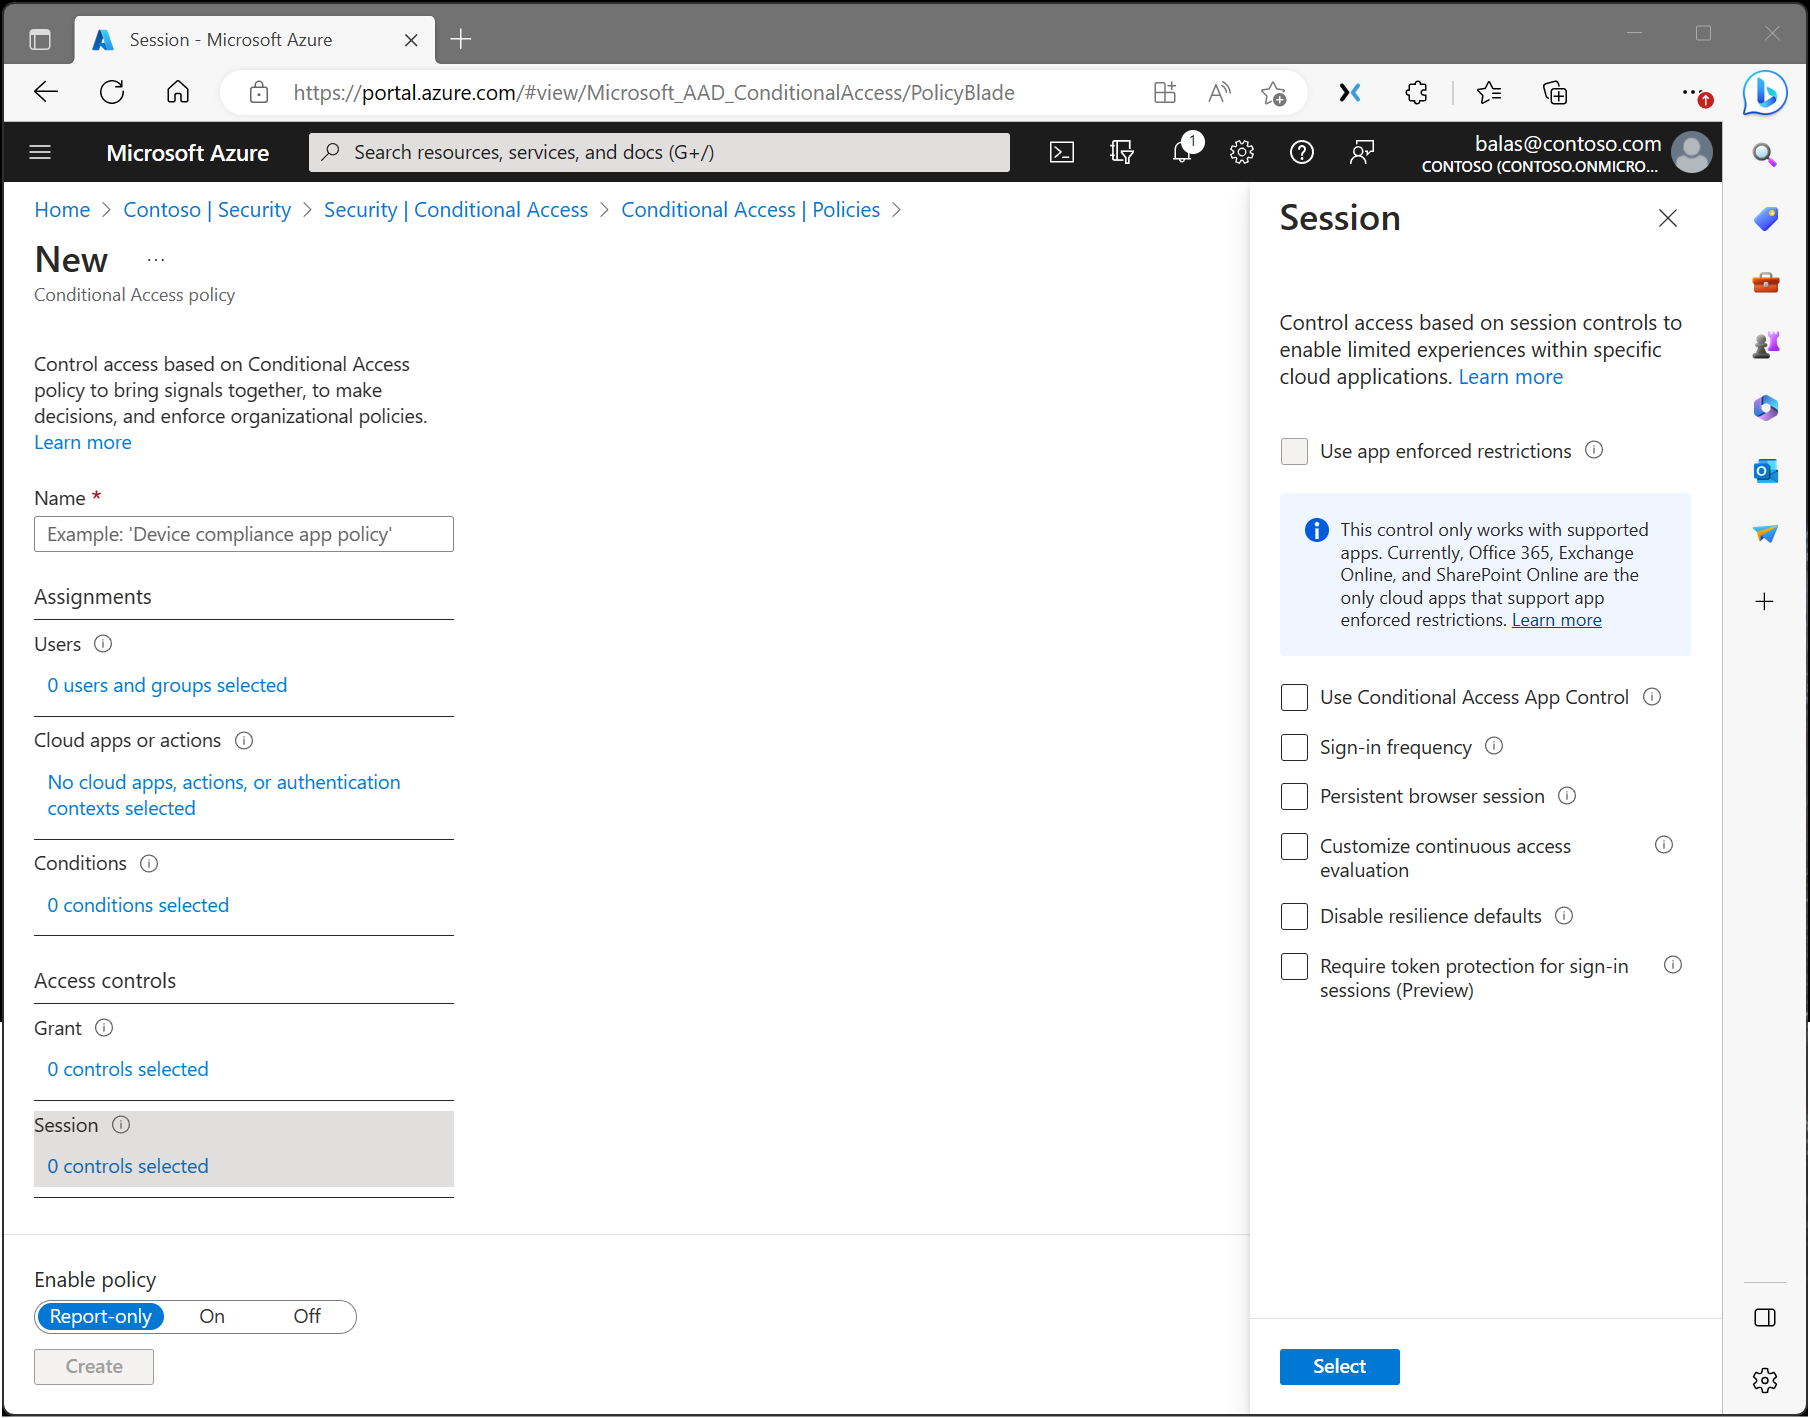 mCAS Session Policy and the Block Download Control Type - Microsoft  Community Hub